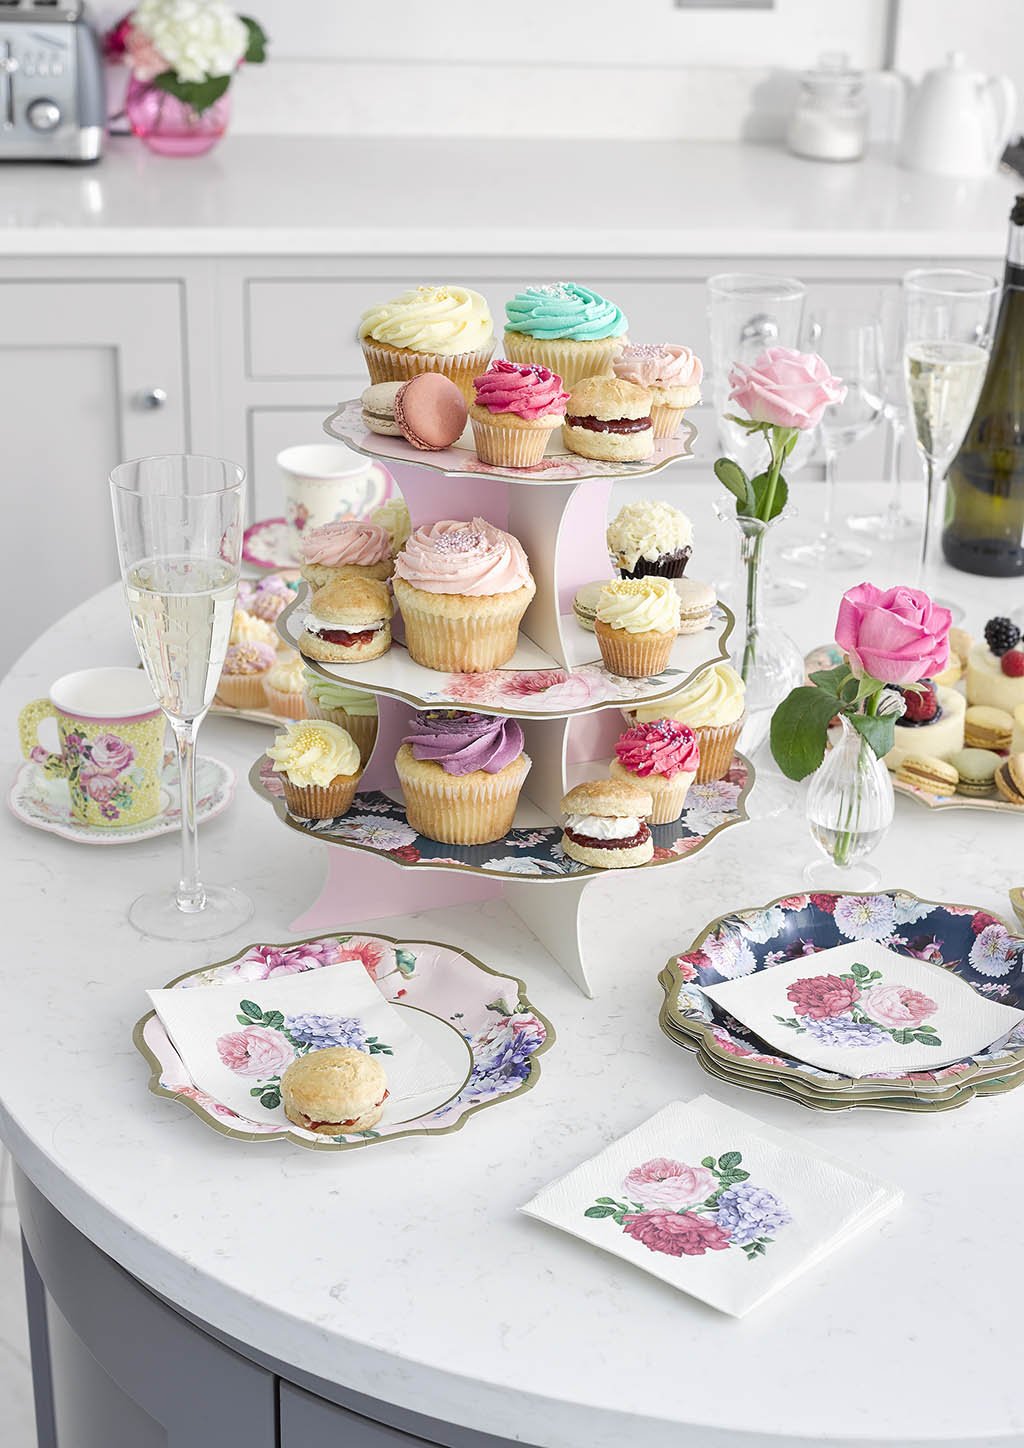 Truly Scrumptious 3 Tier Cake Stands